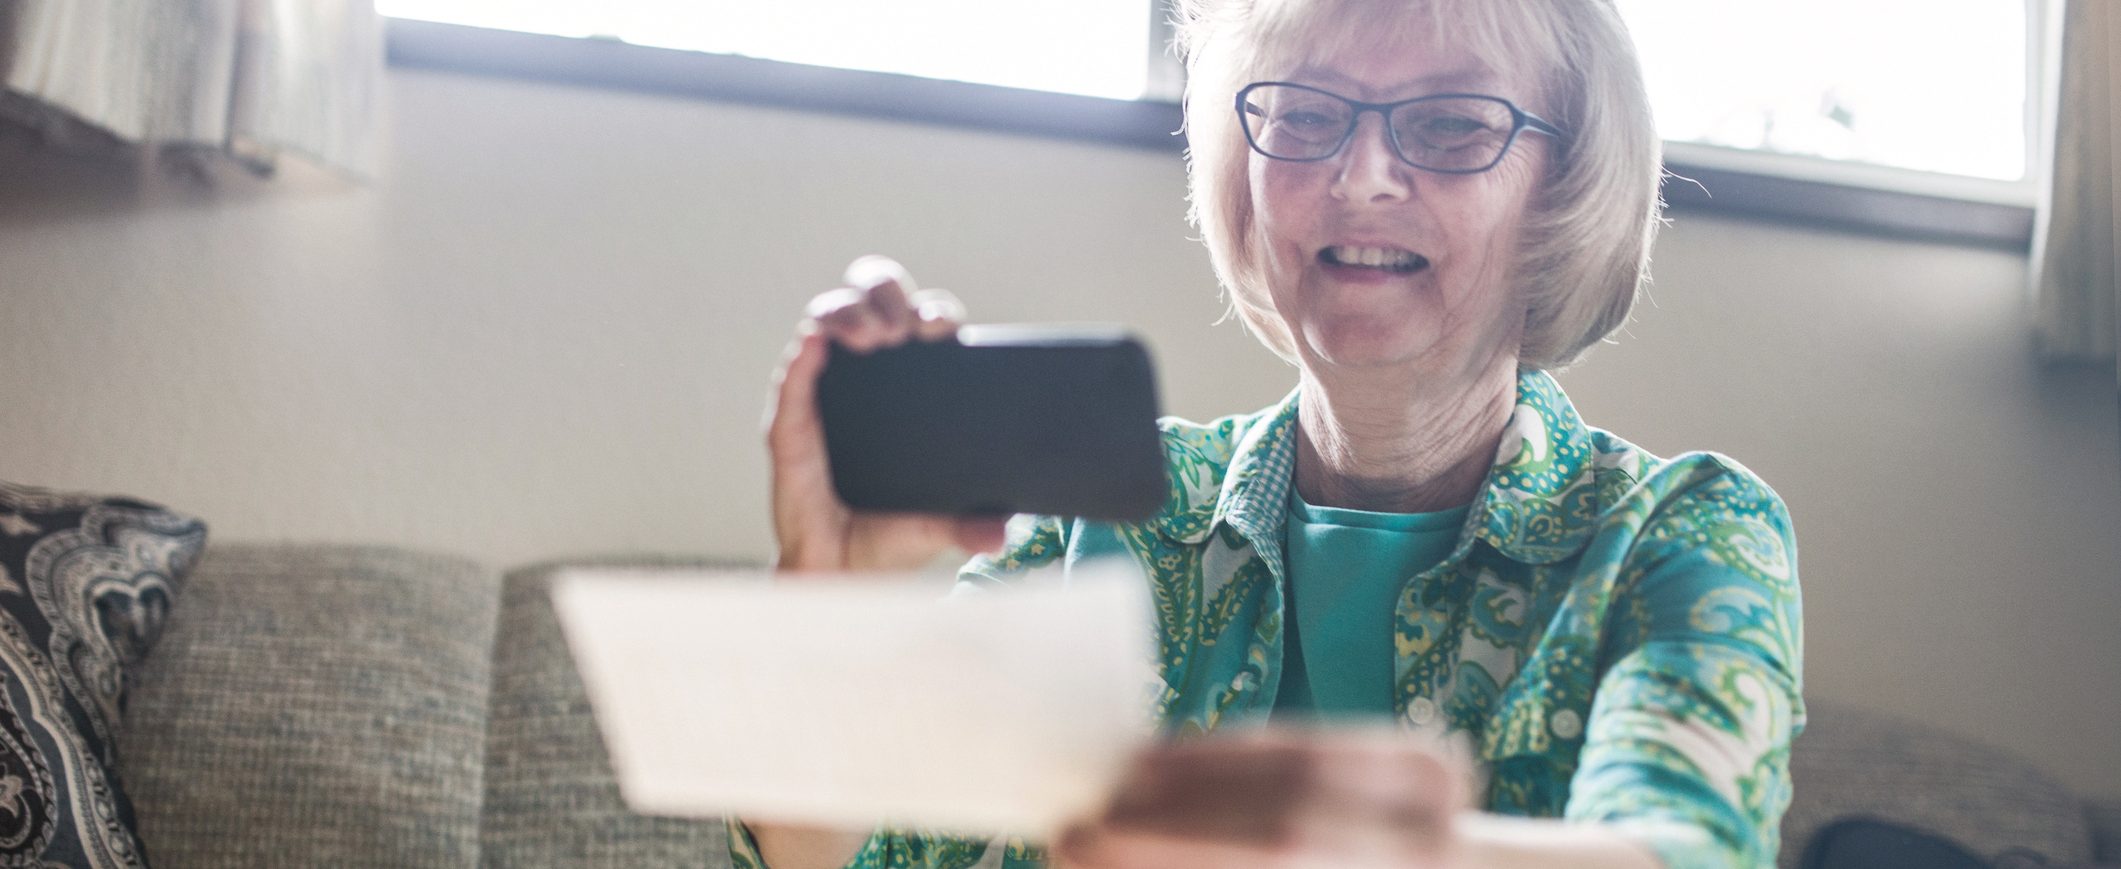 An older woman takes a picture of a check with her phone in order to use mobile check deposit.